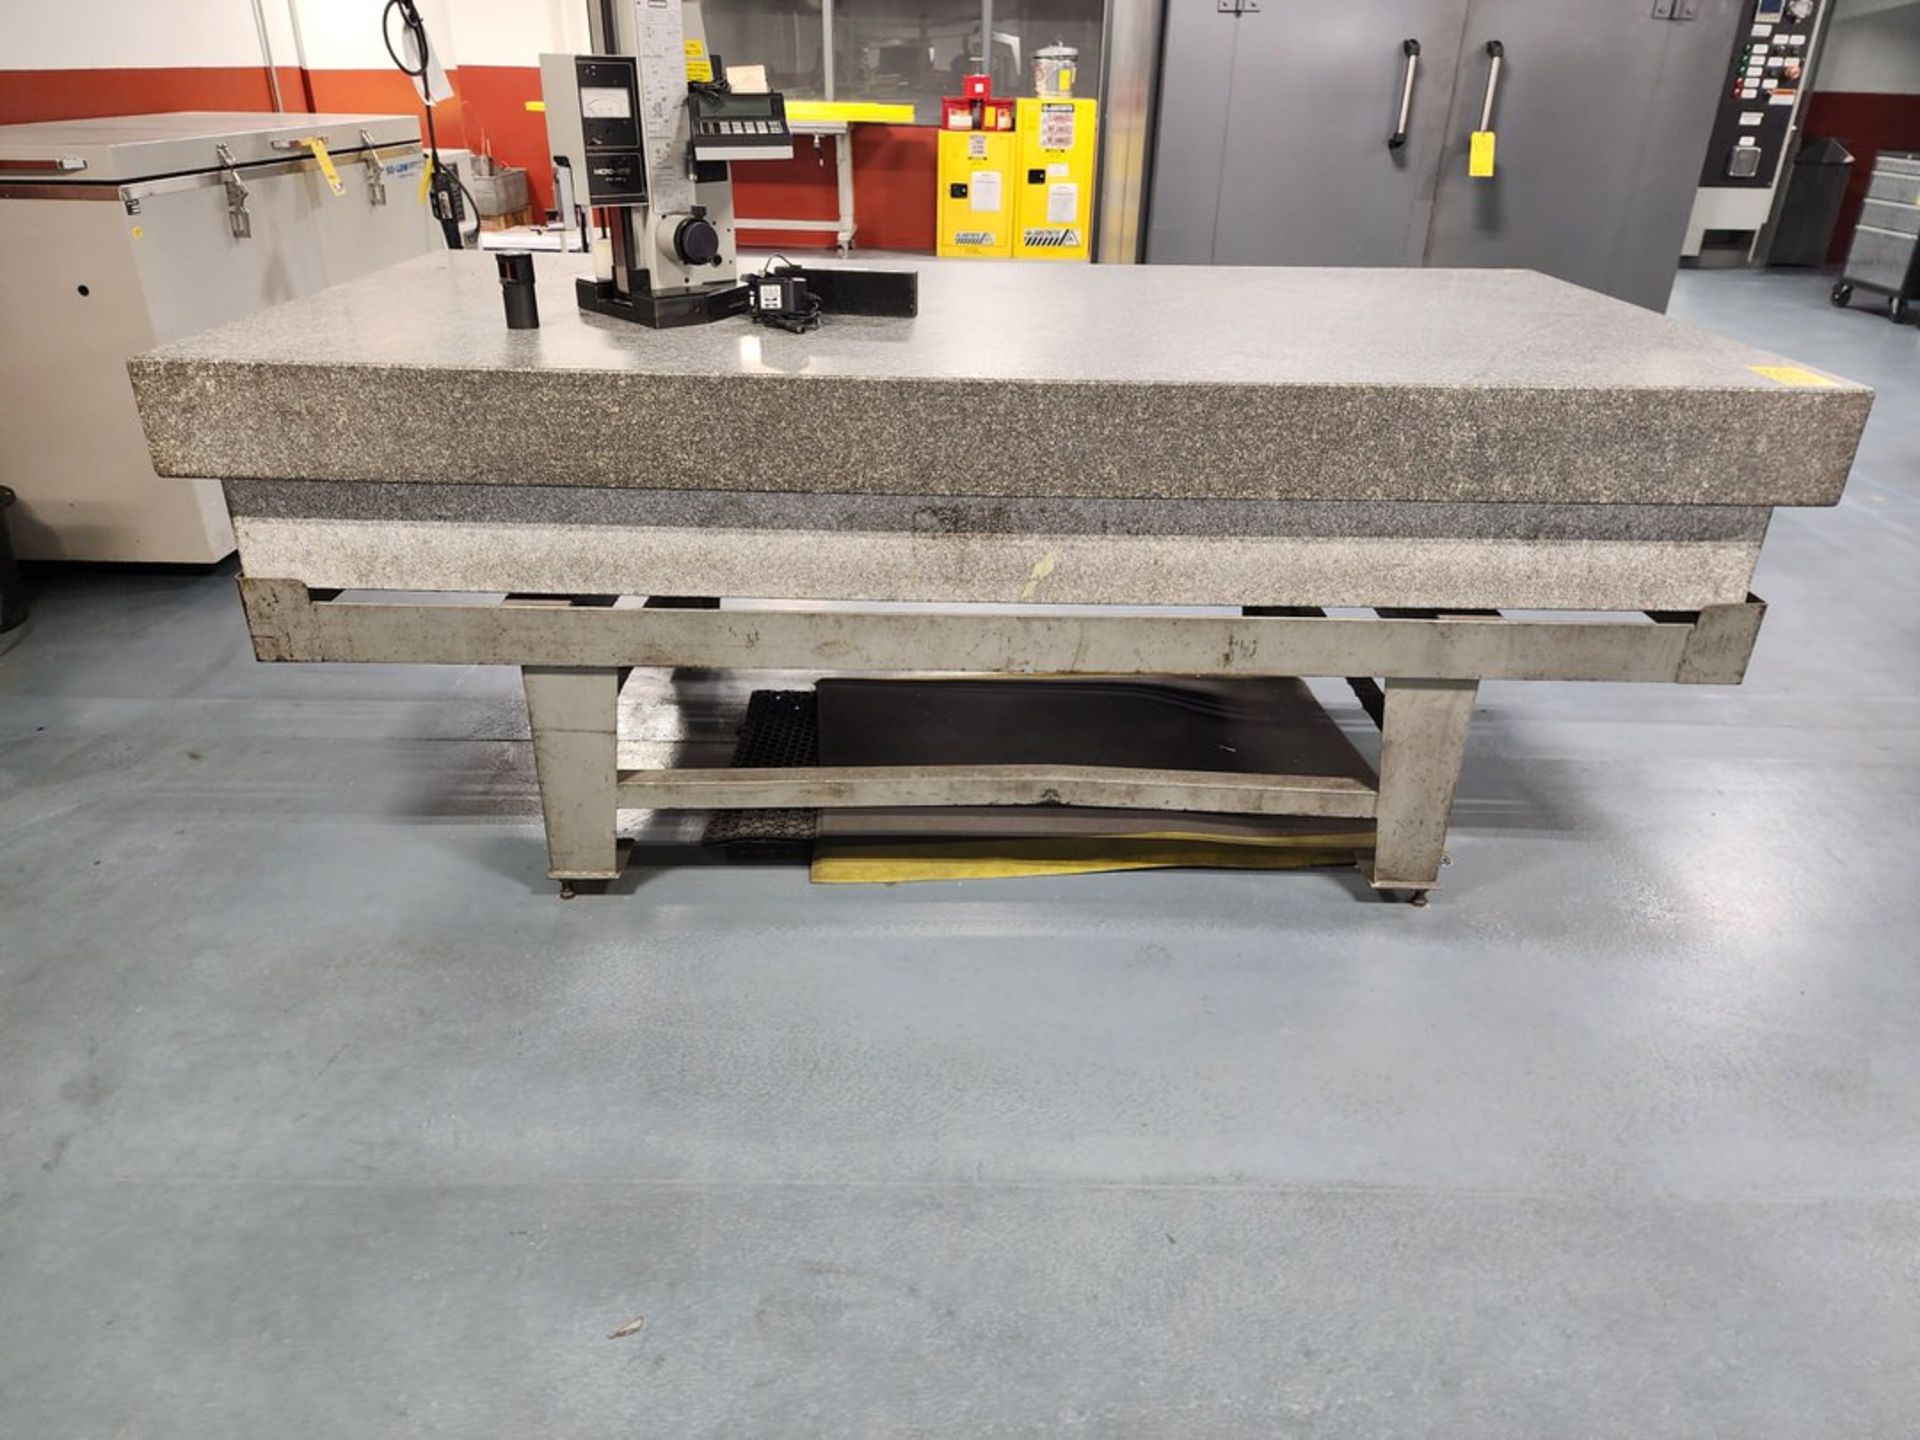 Surface Granite Plate W/ Stand 96"x48" - Image 2 of 4